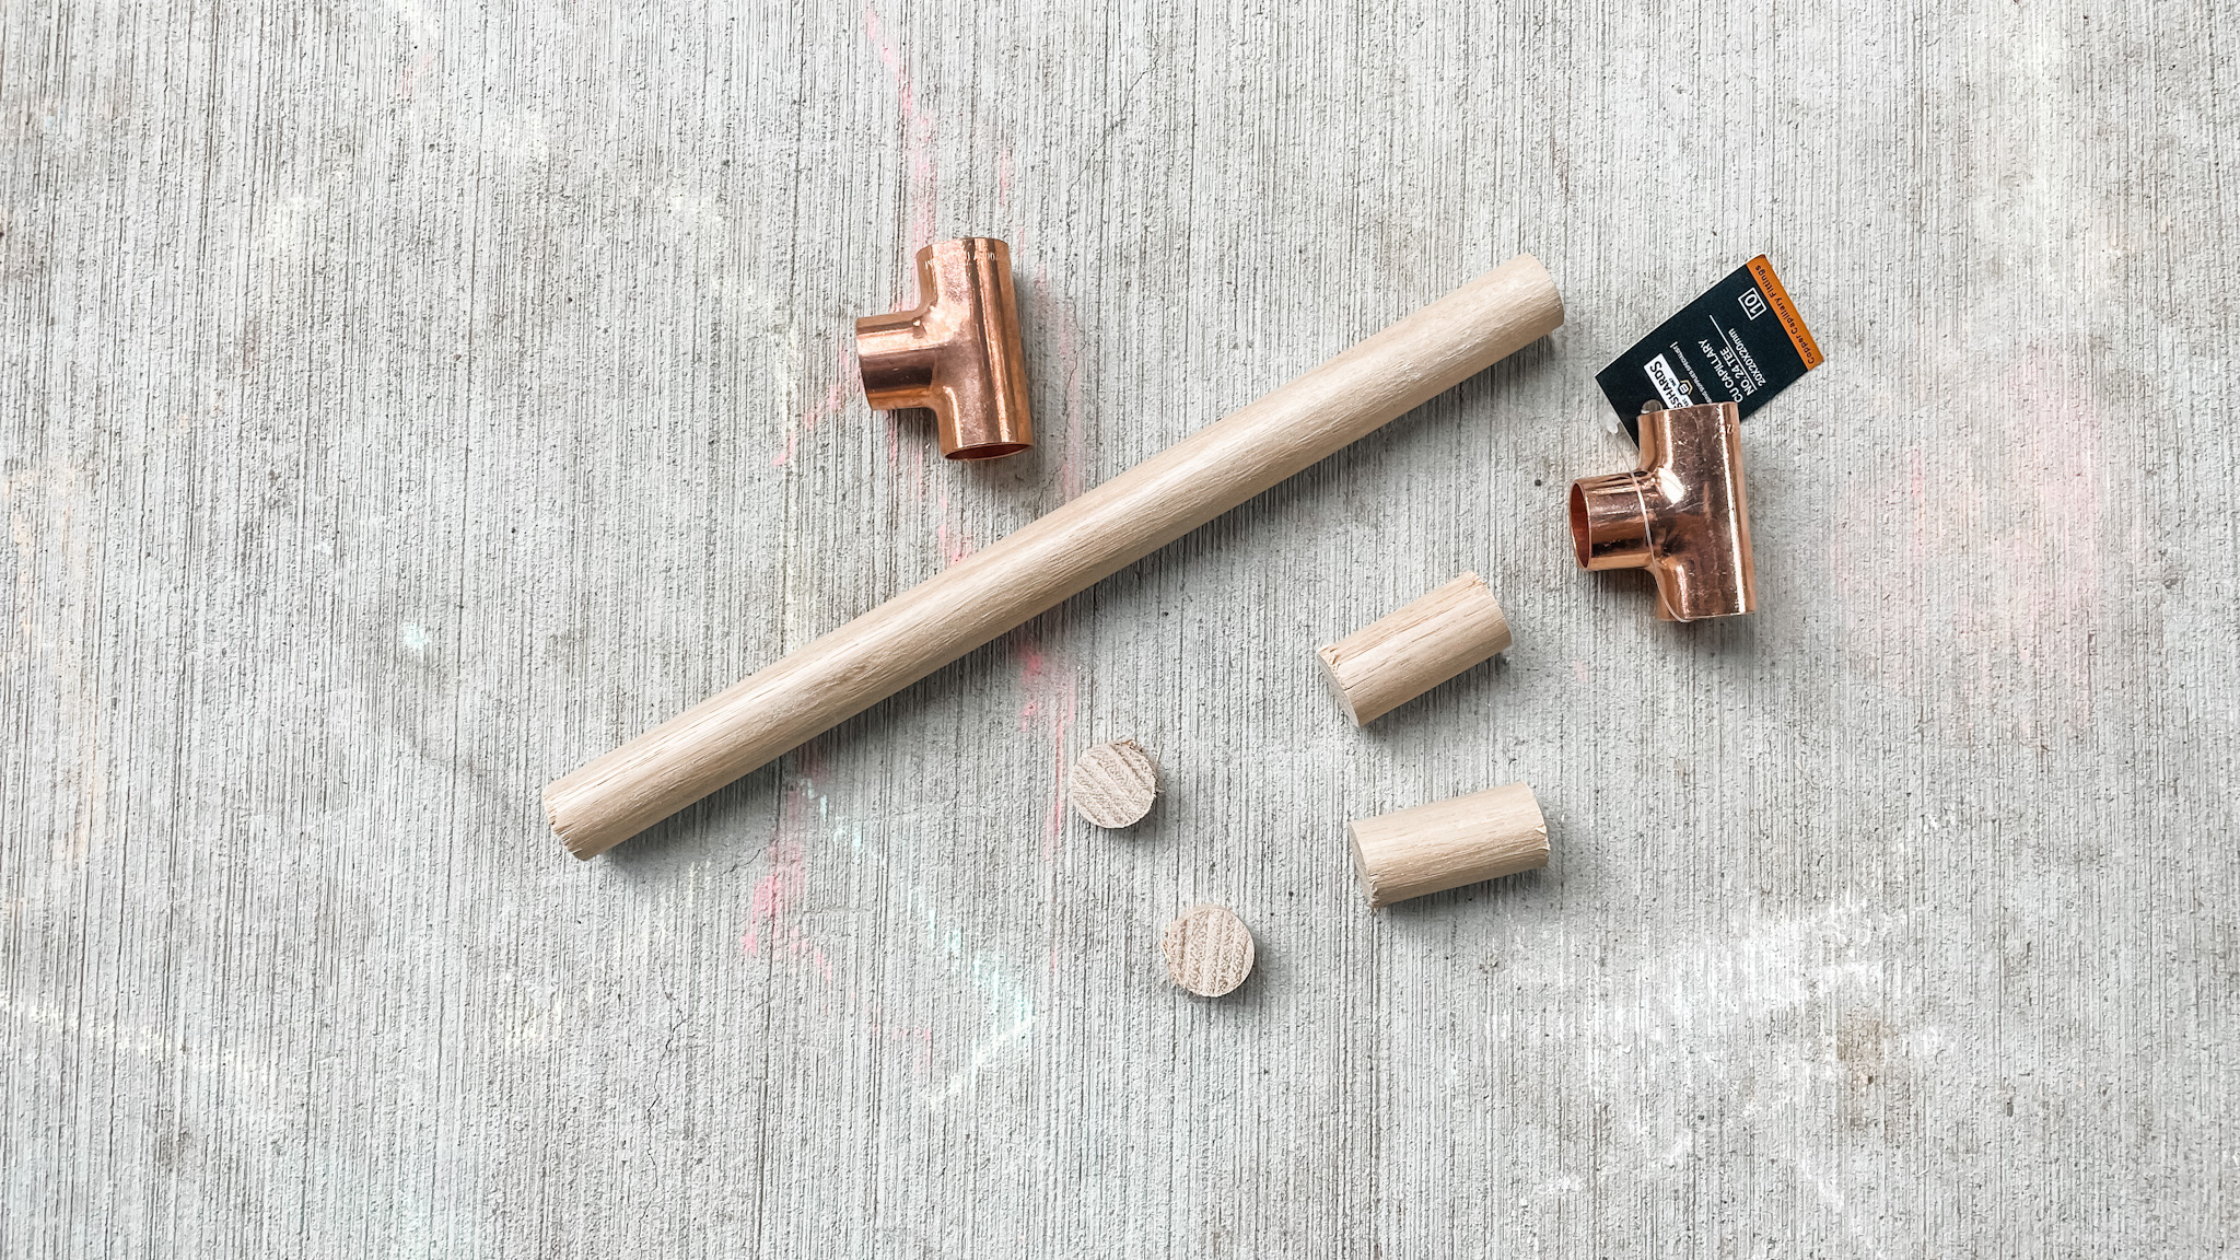 Assembly drawer pulls<br />
